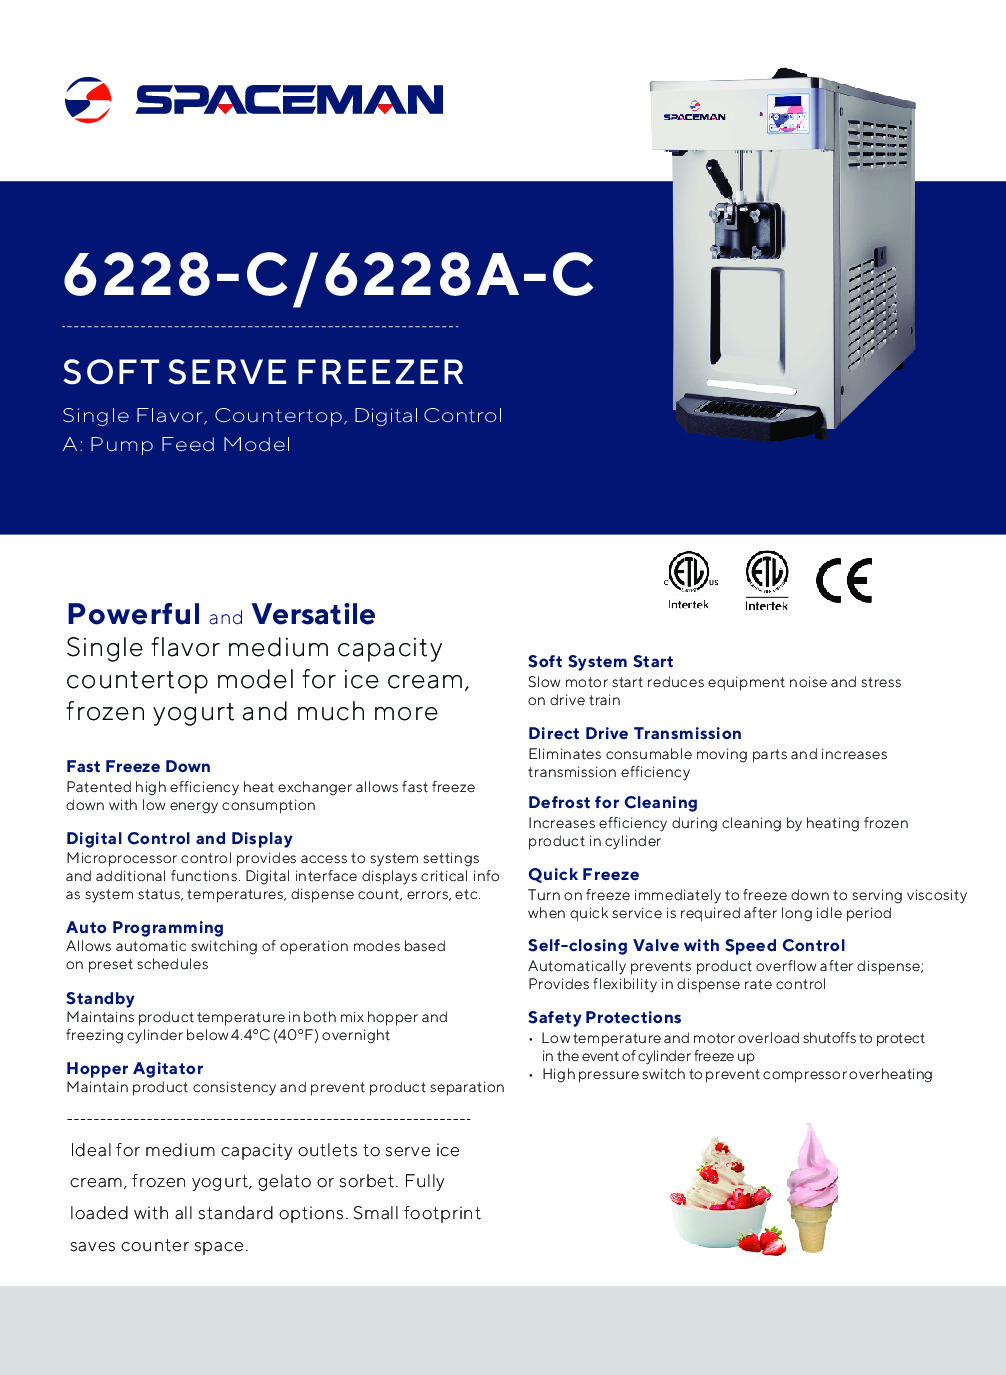 SPACEMAN 6228A Air Or Water Cooled Counter Top Portable Ice Cream Machine -  Buy SPACEMAN 6228A Air Or Water Cooled Counter Top Portable Ice Cream  Machine Product on